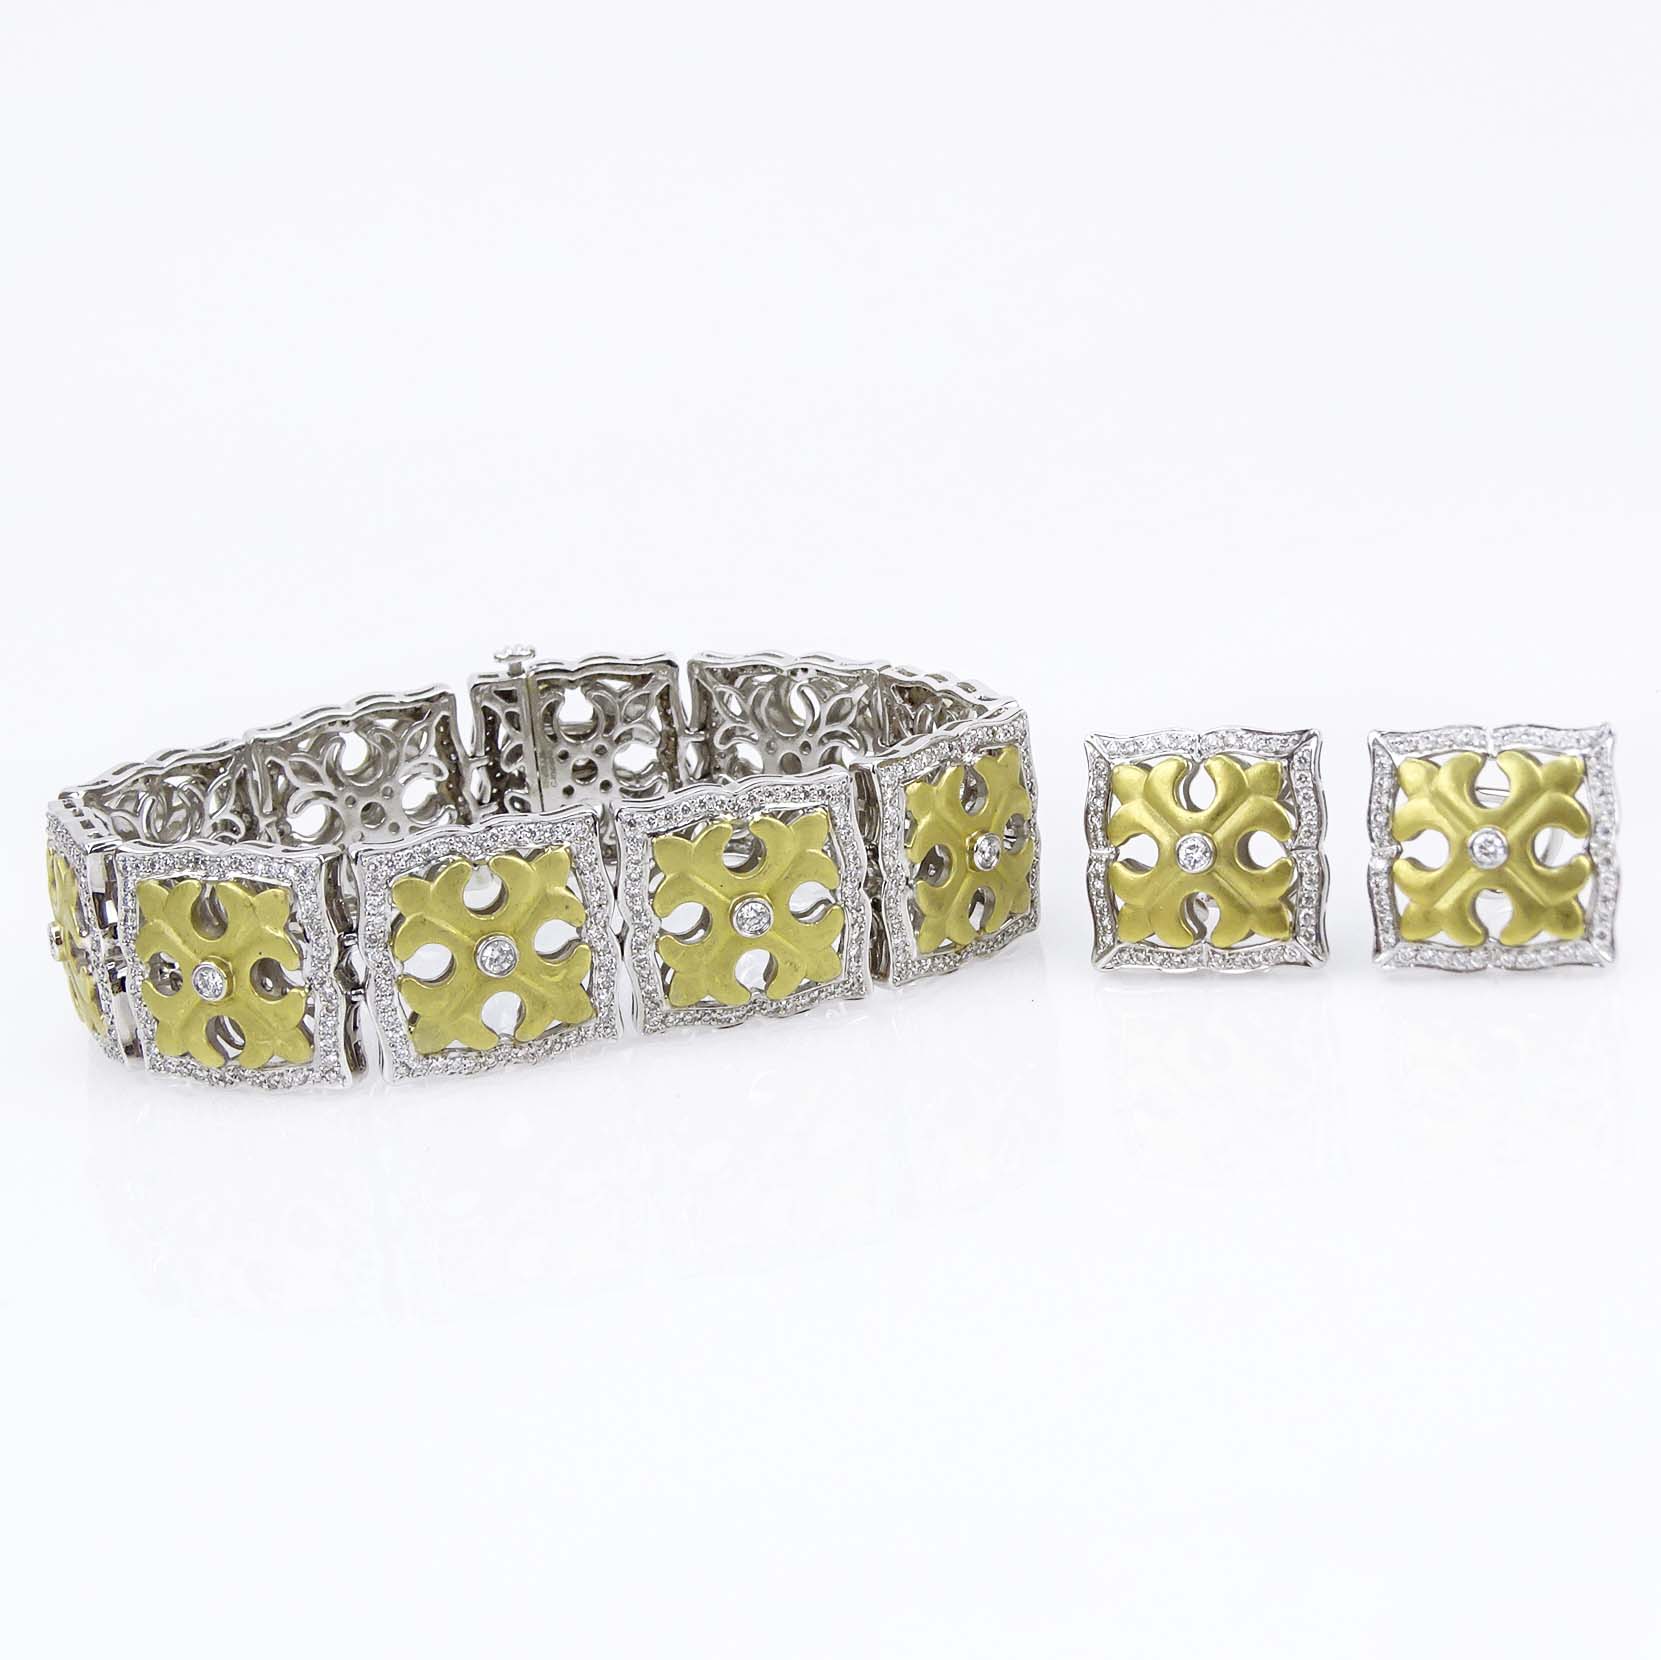 Charles Krypell 5.35 Carat Pave Set Round Brilliant Cut Diamond and 18 Karat Gold Bracelet and Earring Suite.